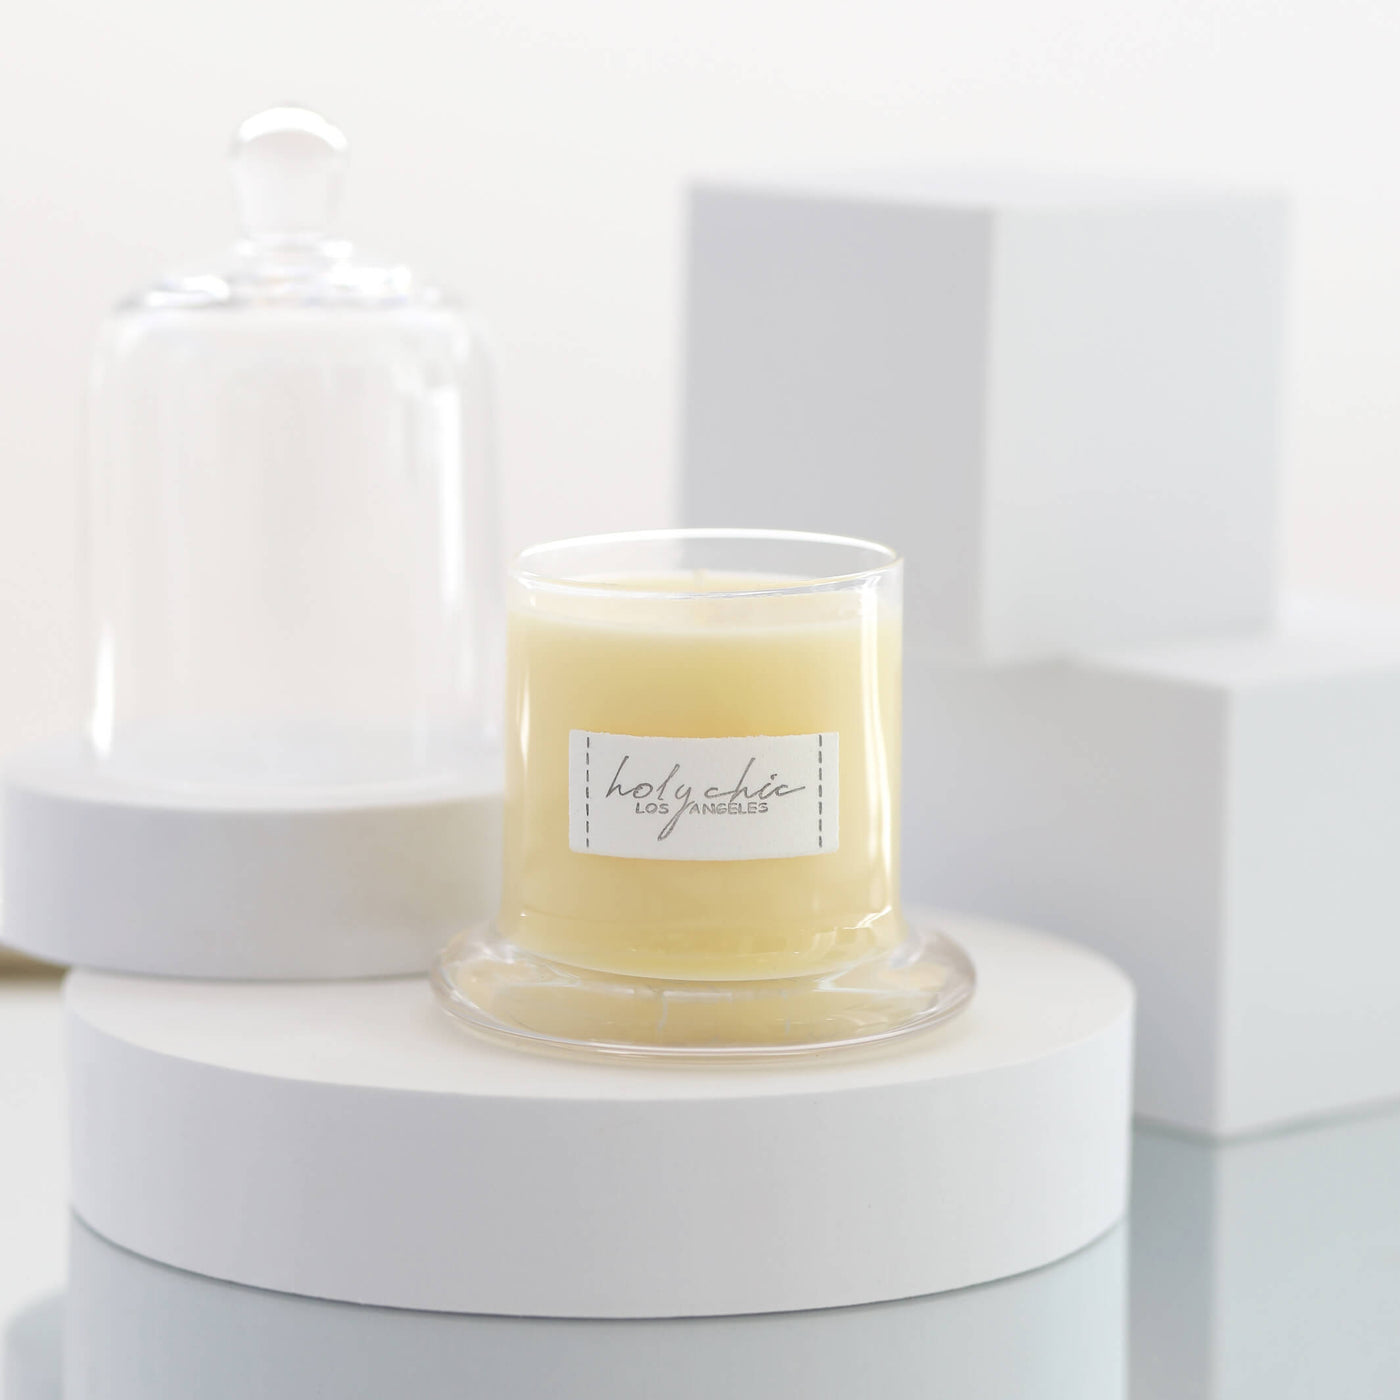 Scented candle in a light yellow color